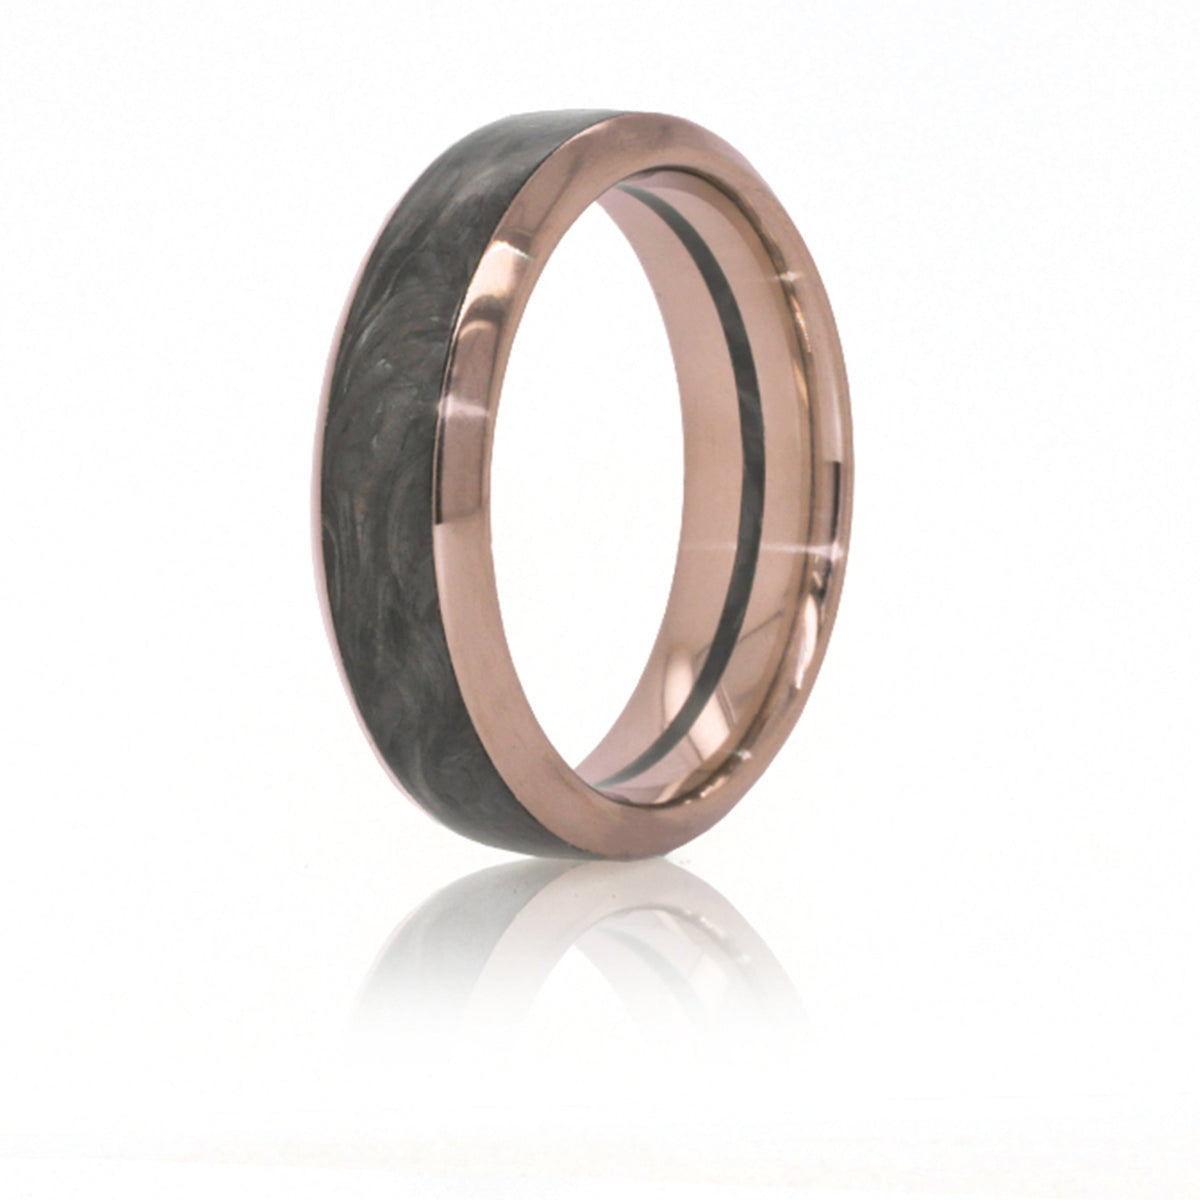 Wedding Band featuring a forged carbon fiber exterior with rose gold edging, and a Rose Gold interior with center Forged Carbon Fiber stripe.